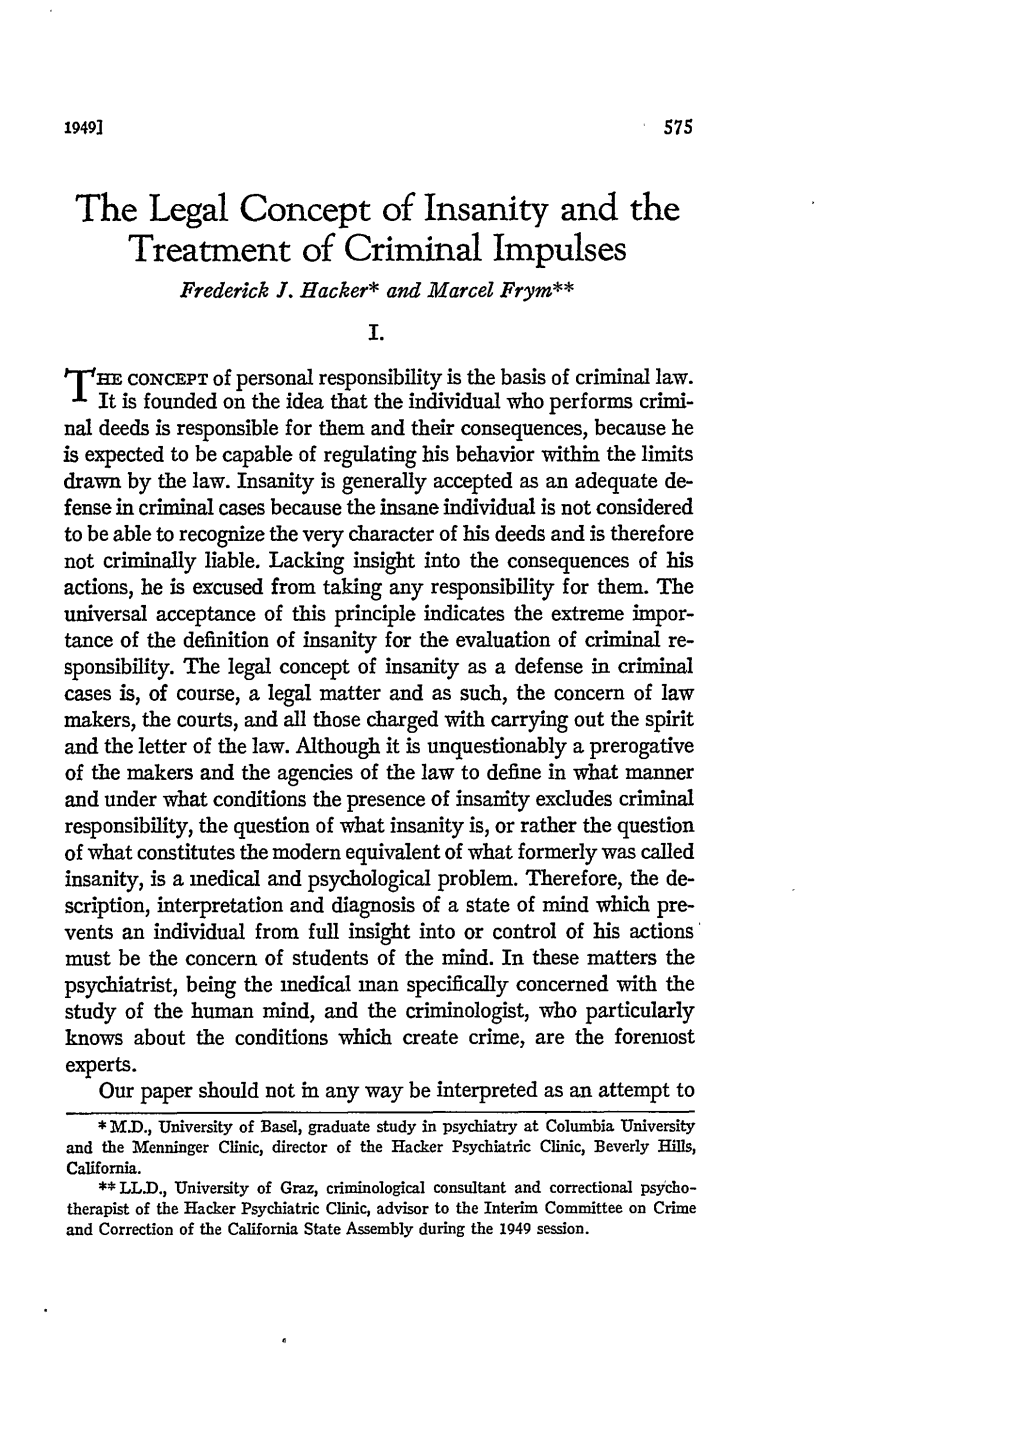 The Legal Concept of Insanity and the Treatment of Criminal Impulses Frederick I